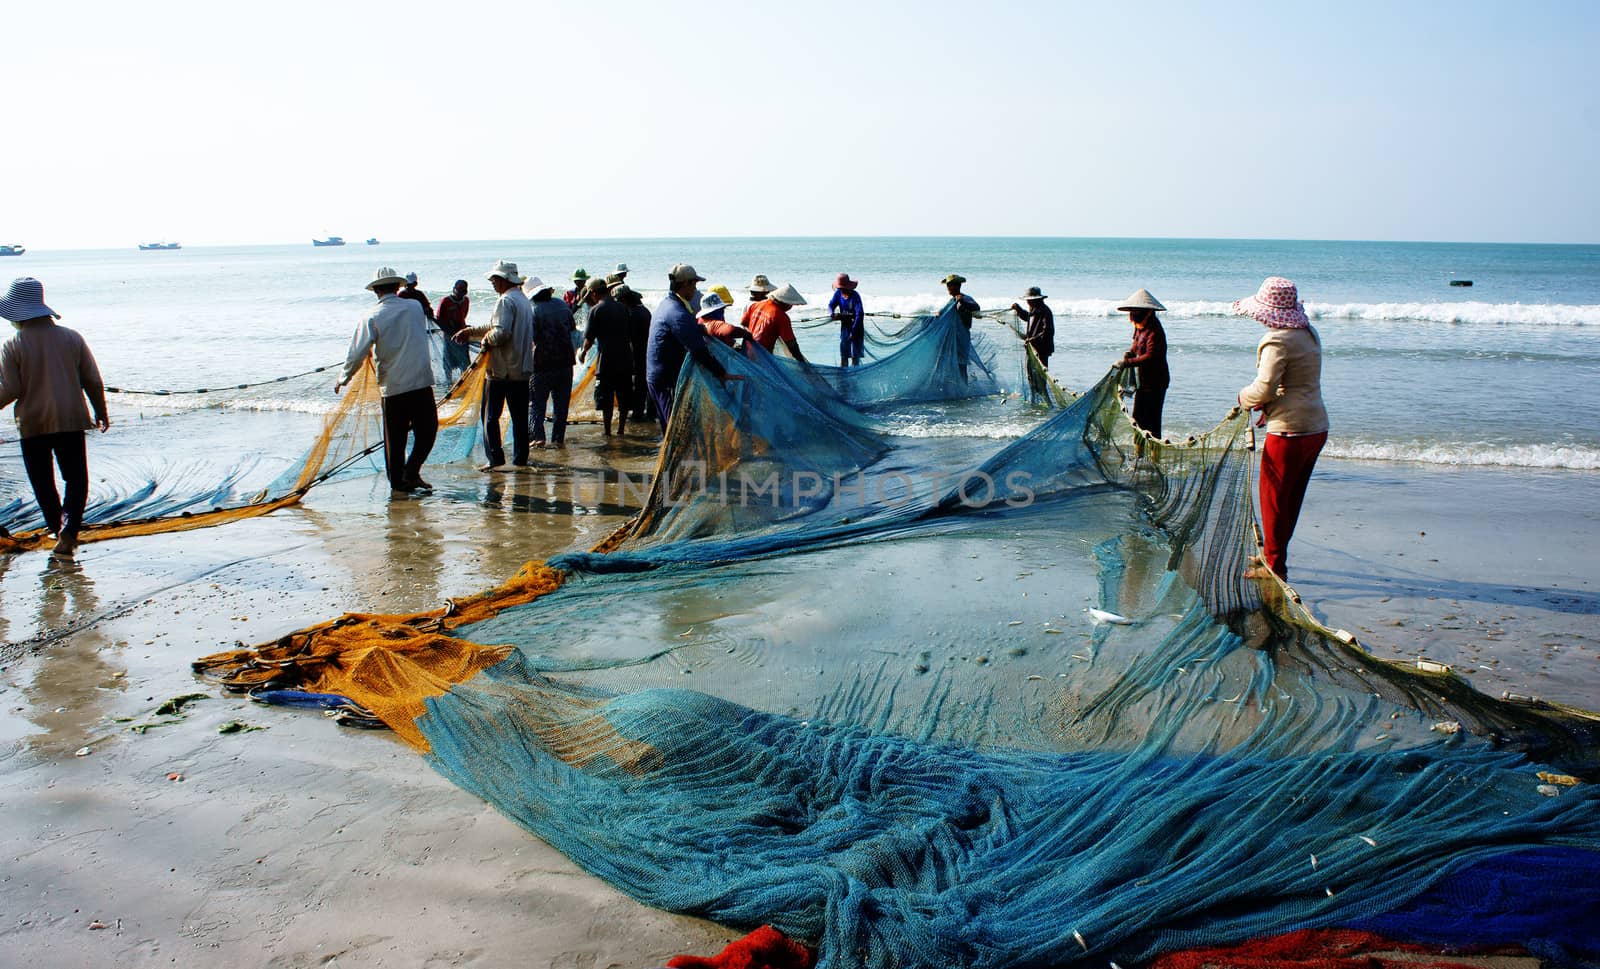 BINH THUAN, VIETNAM- JAN 22: Crowded atmosphere on beach with impression 's group of fisherman pull fish net, row of people with long net in hand, Viet Nam, Jan 22, 2014                           